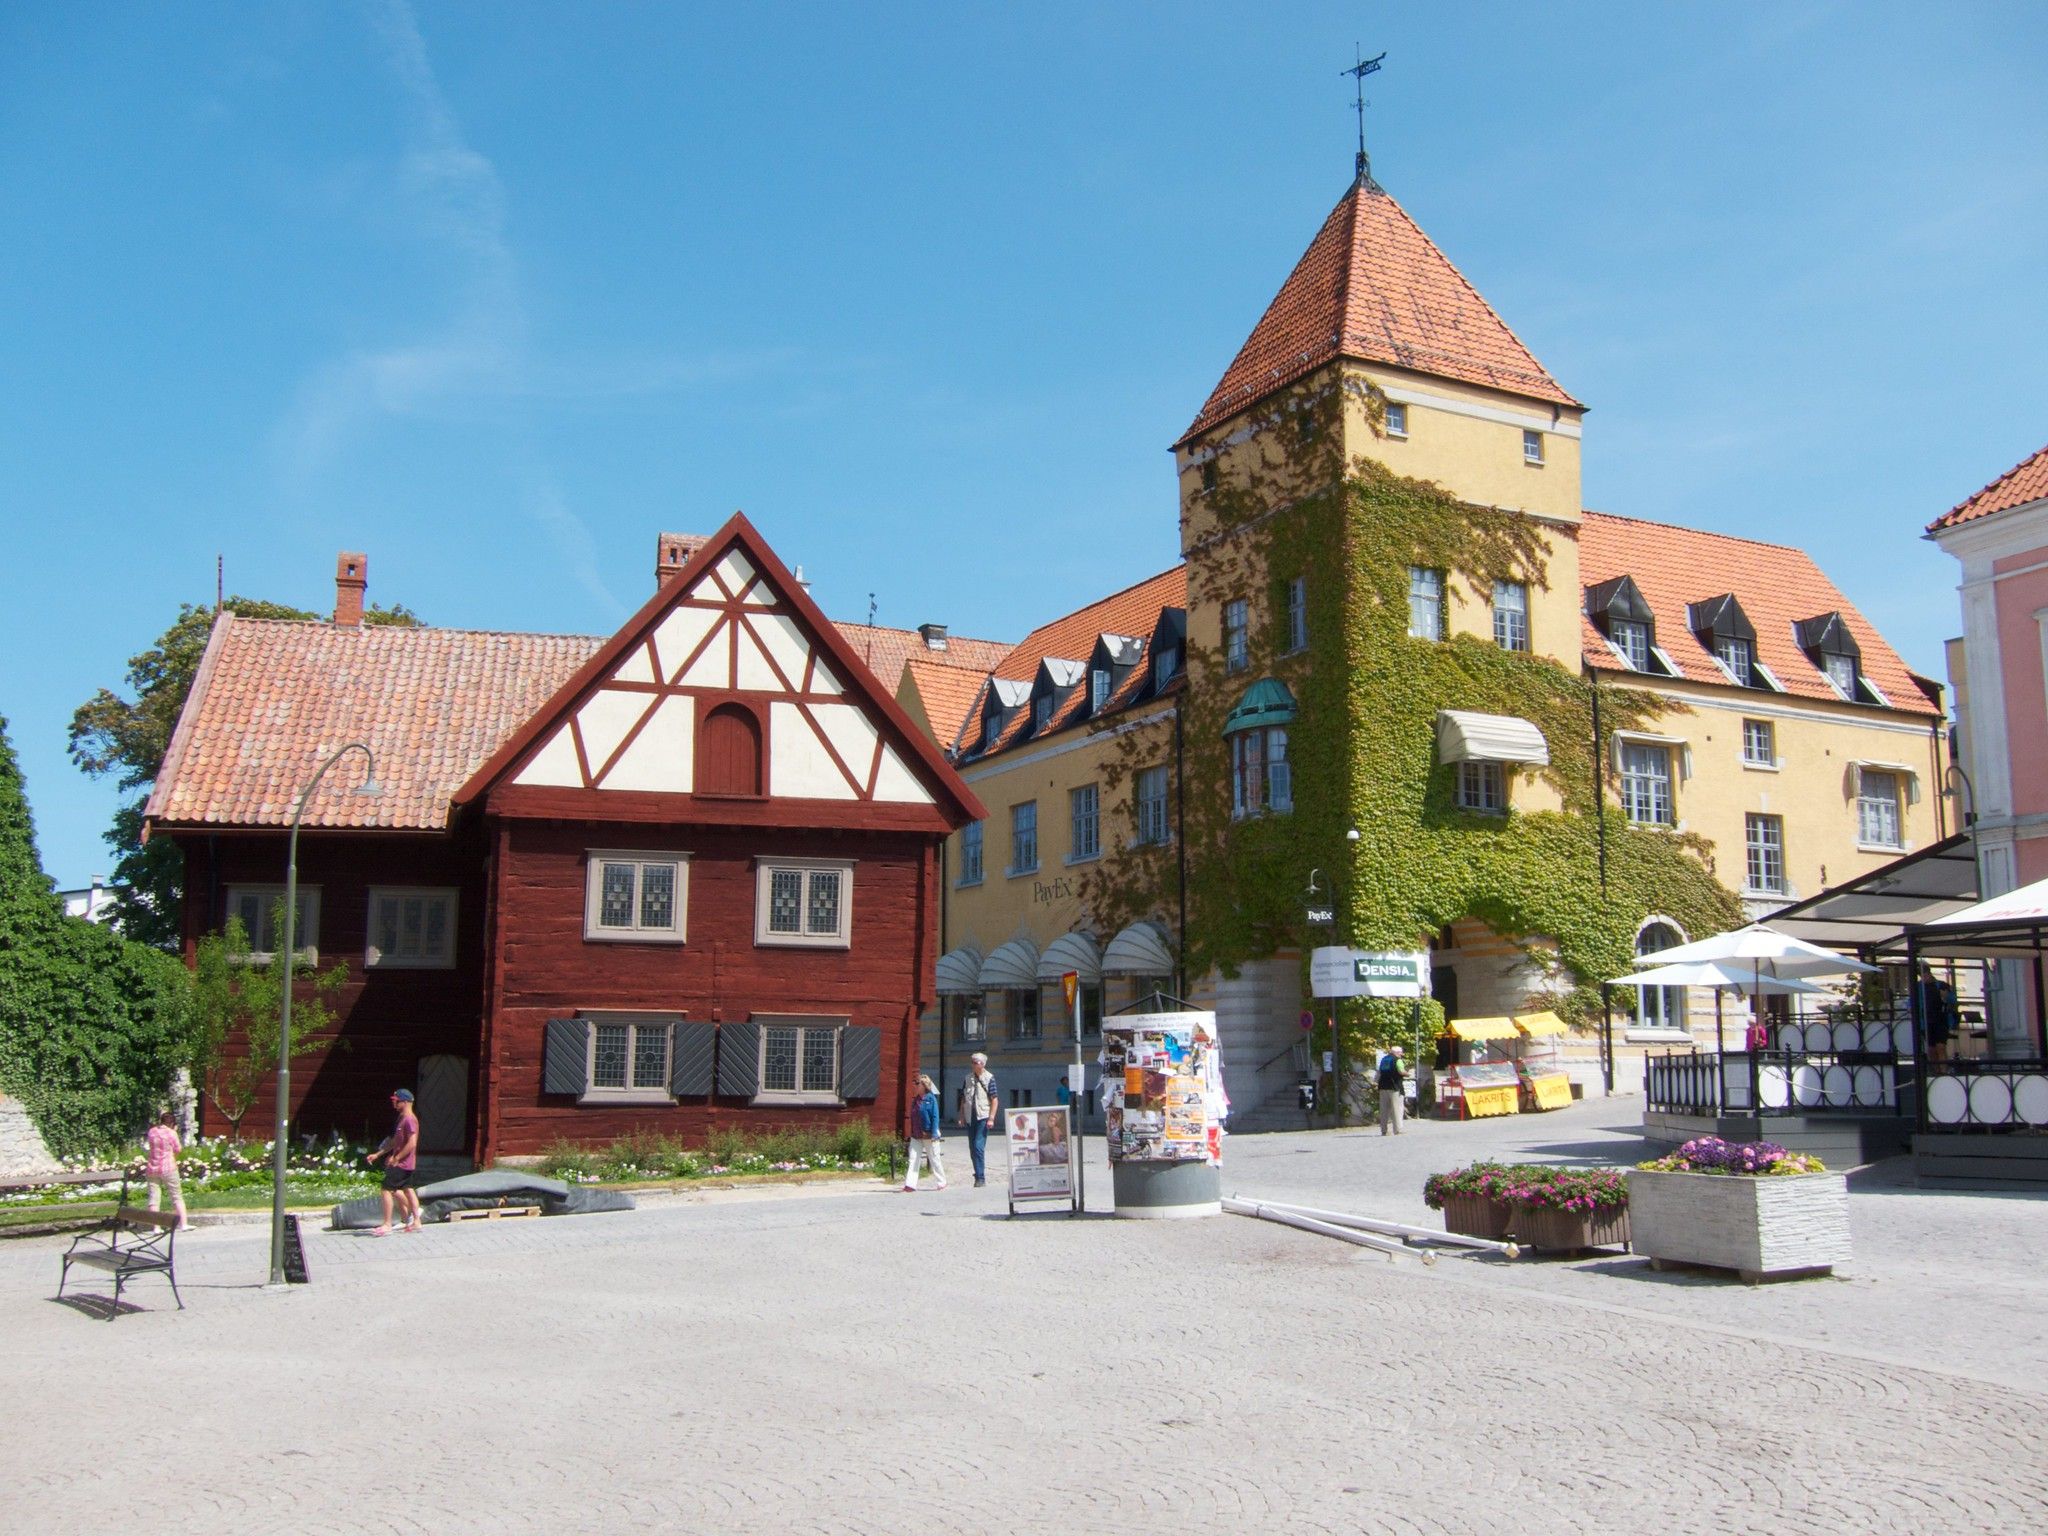 Historic center of Visby